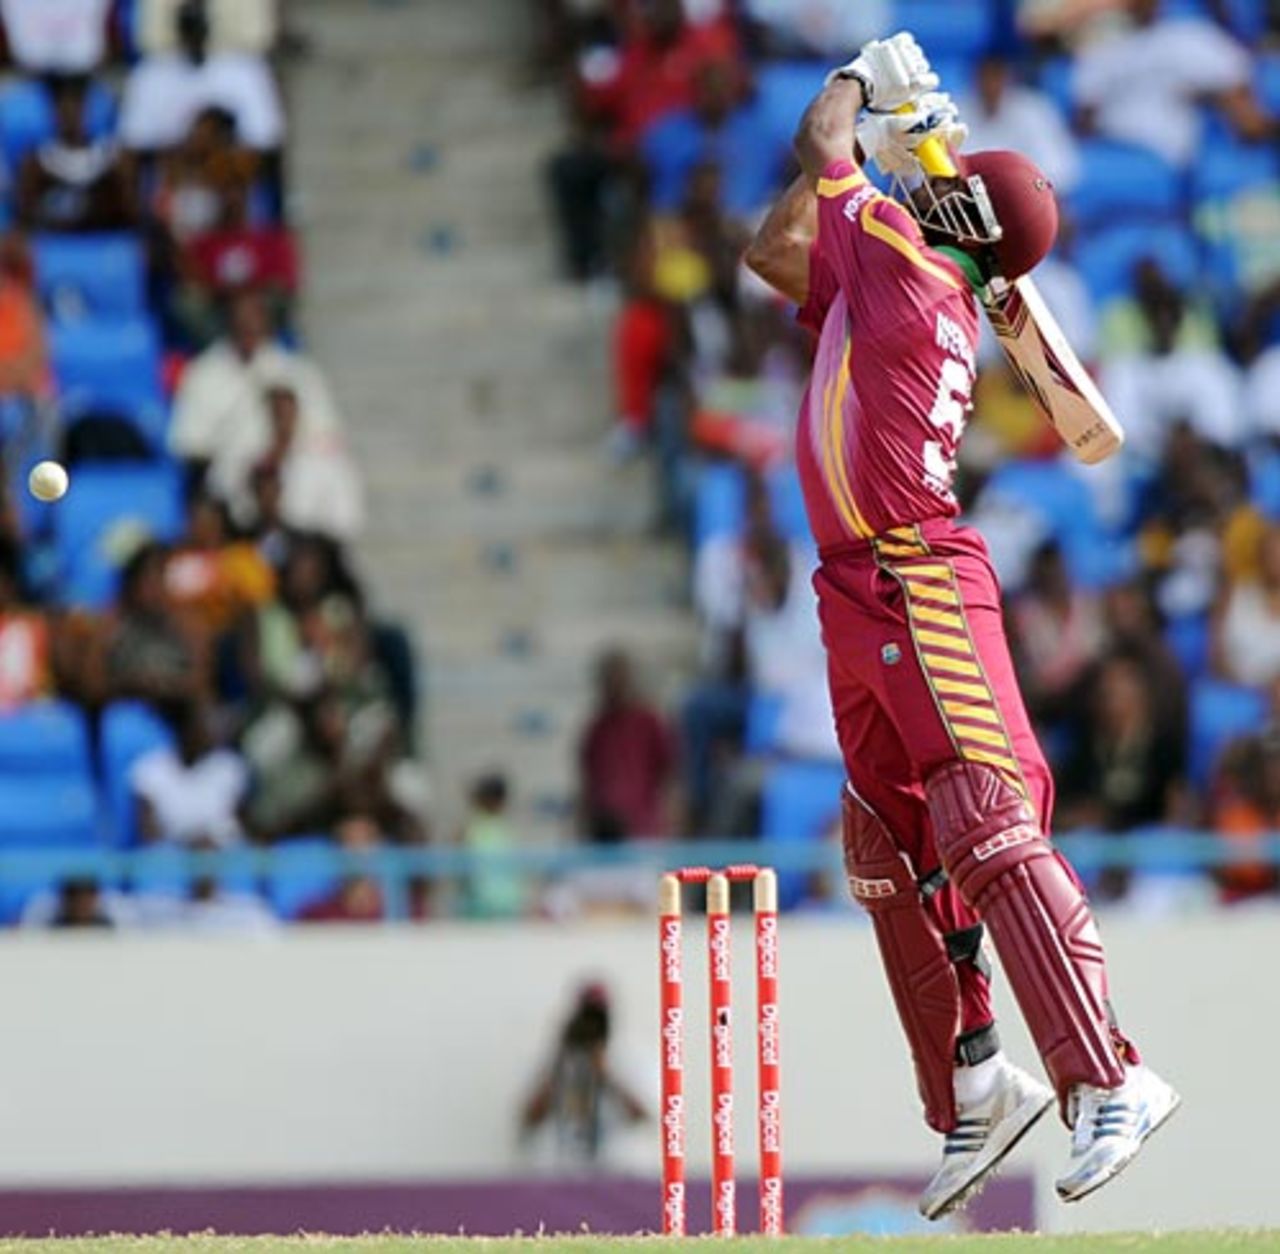 Kieron Pollard attempts to blaze over third man, West Indies v South Africa, 2nd ODI, Antigua, May 24, 2010